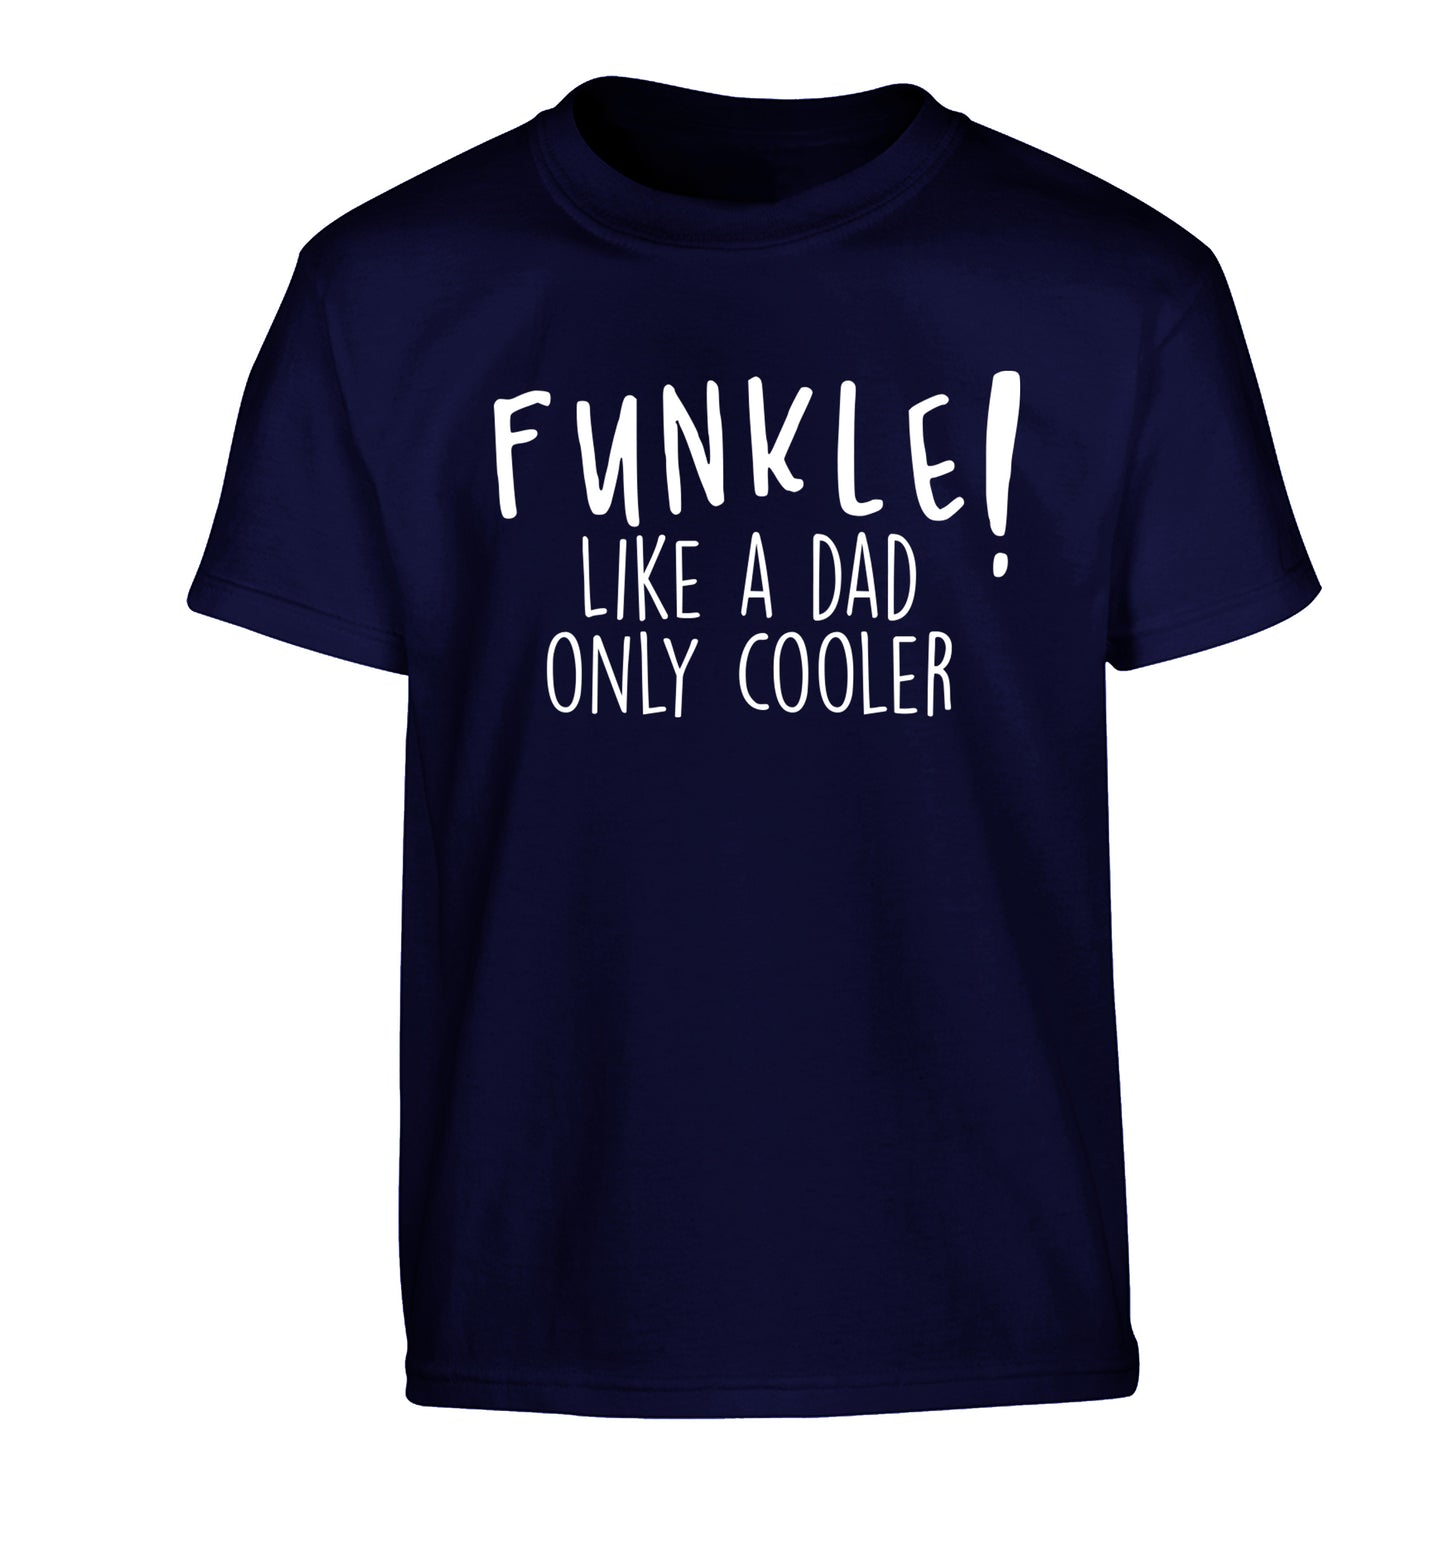 Funkle Like a Dad Only Cooler Children's navy Tshirt 12-13 Years